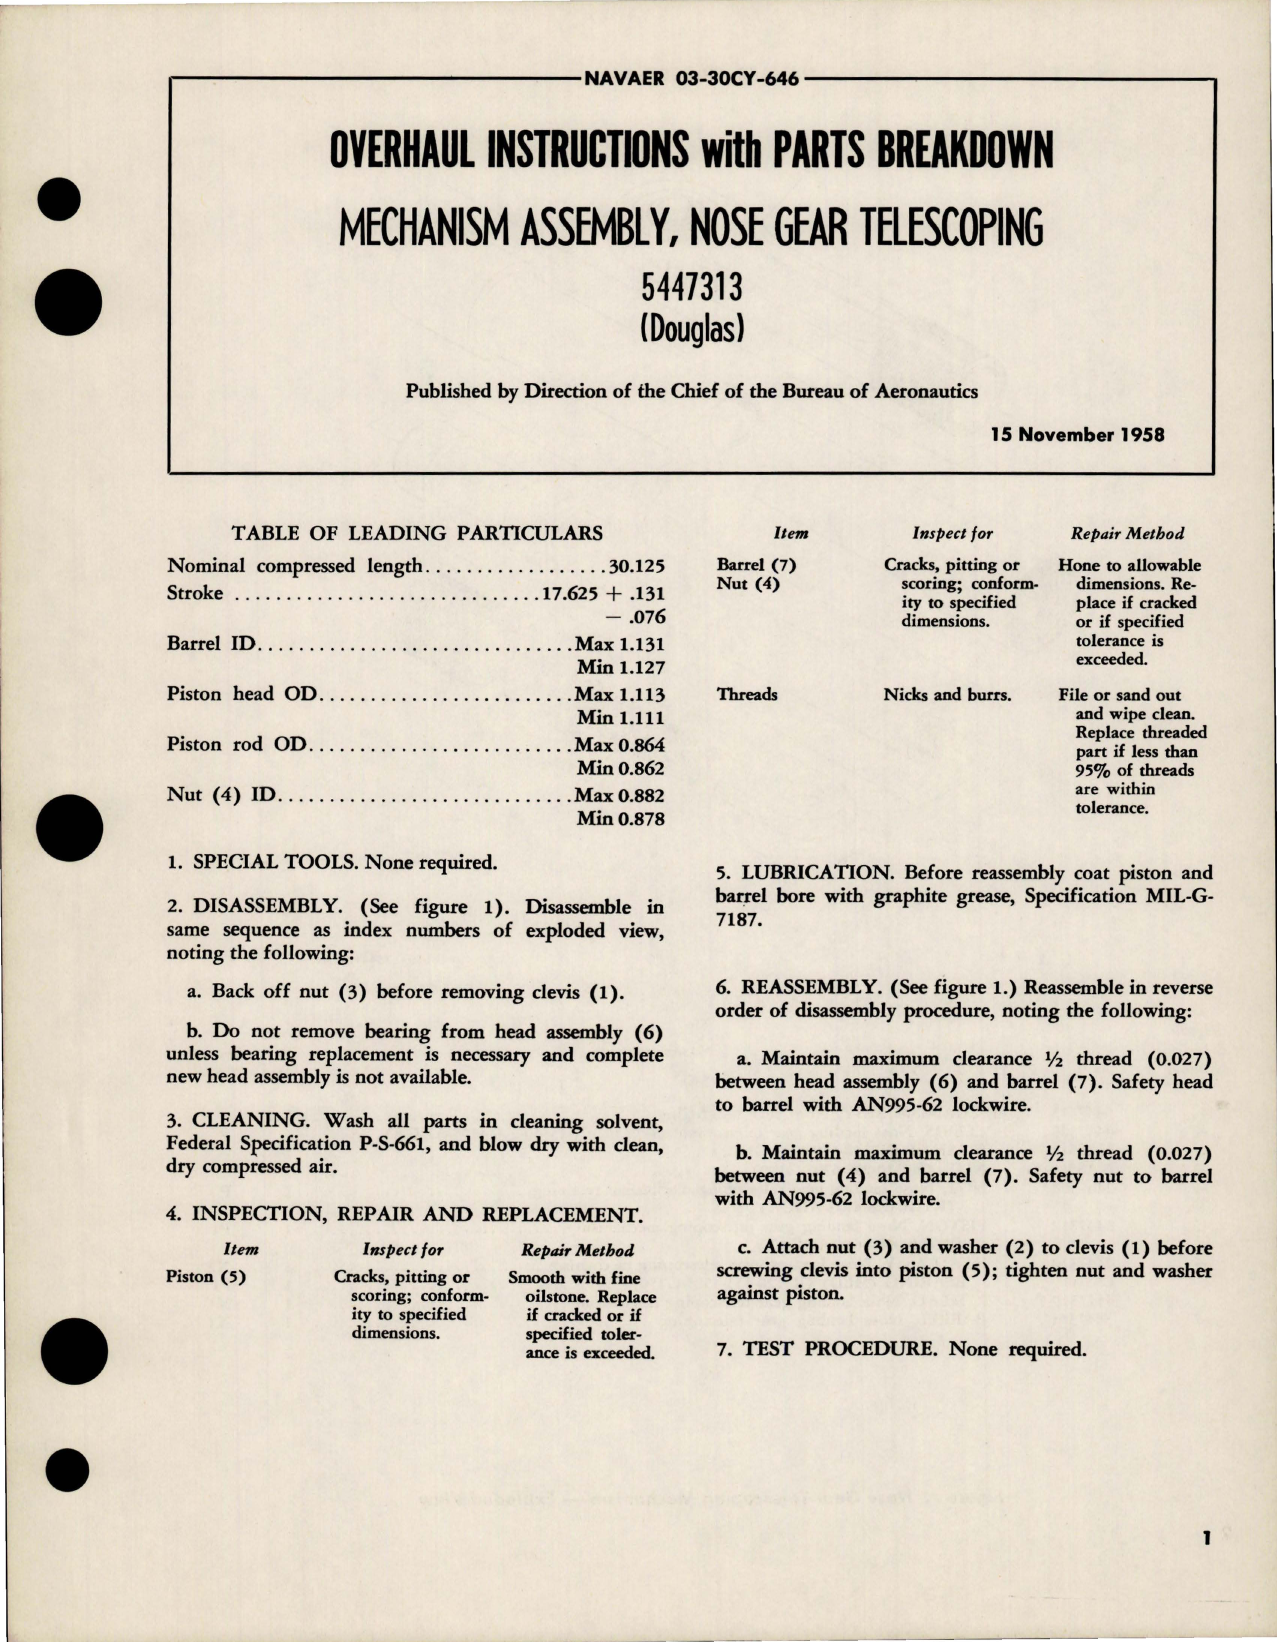 Sample page 1 from AirCorps Library document: Overhaul Instructions with Parts for Nose Gear Telescoping Mechanism Assembly - 5447313